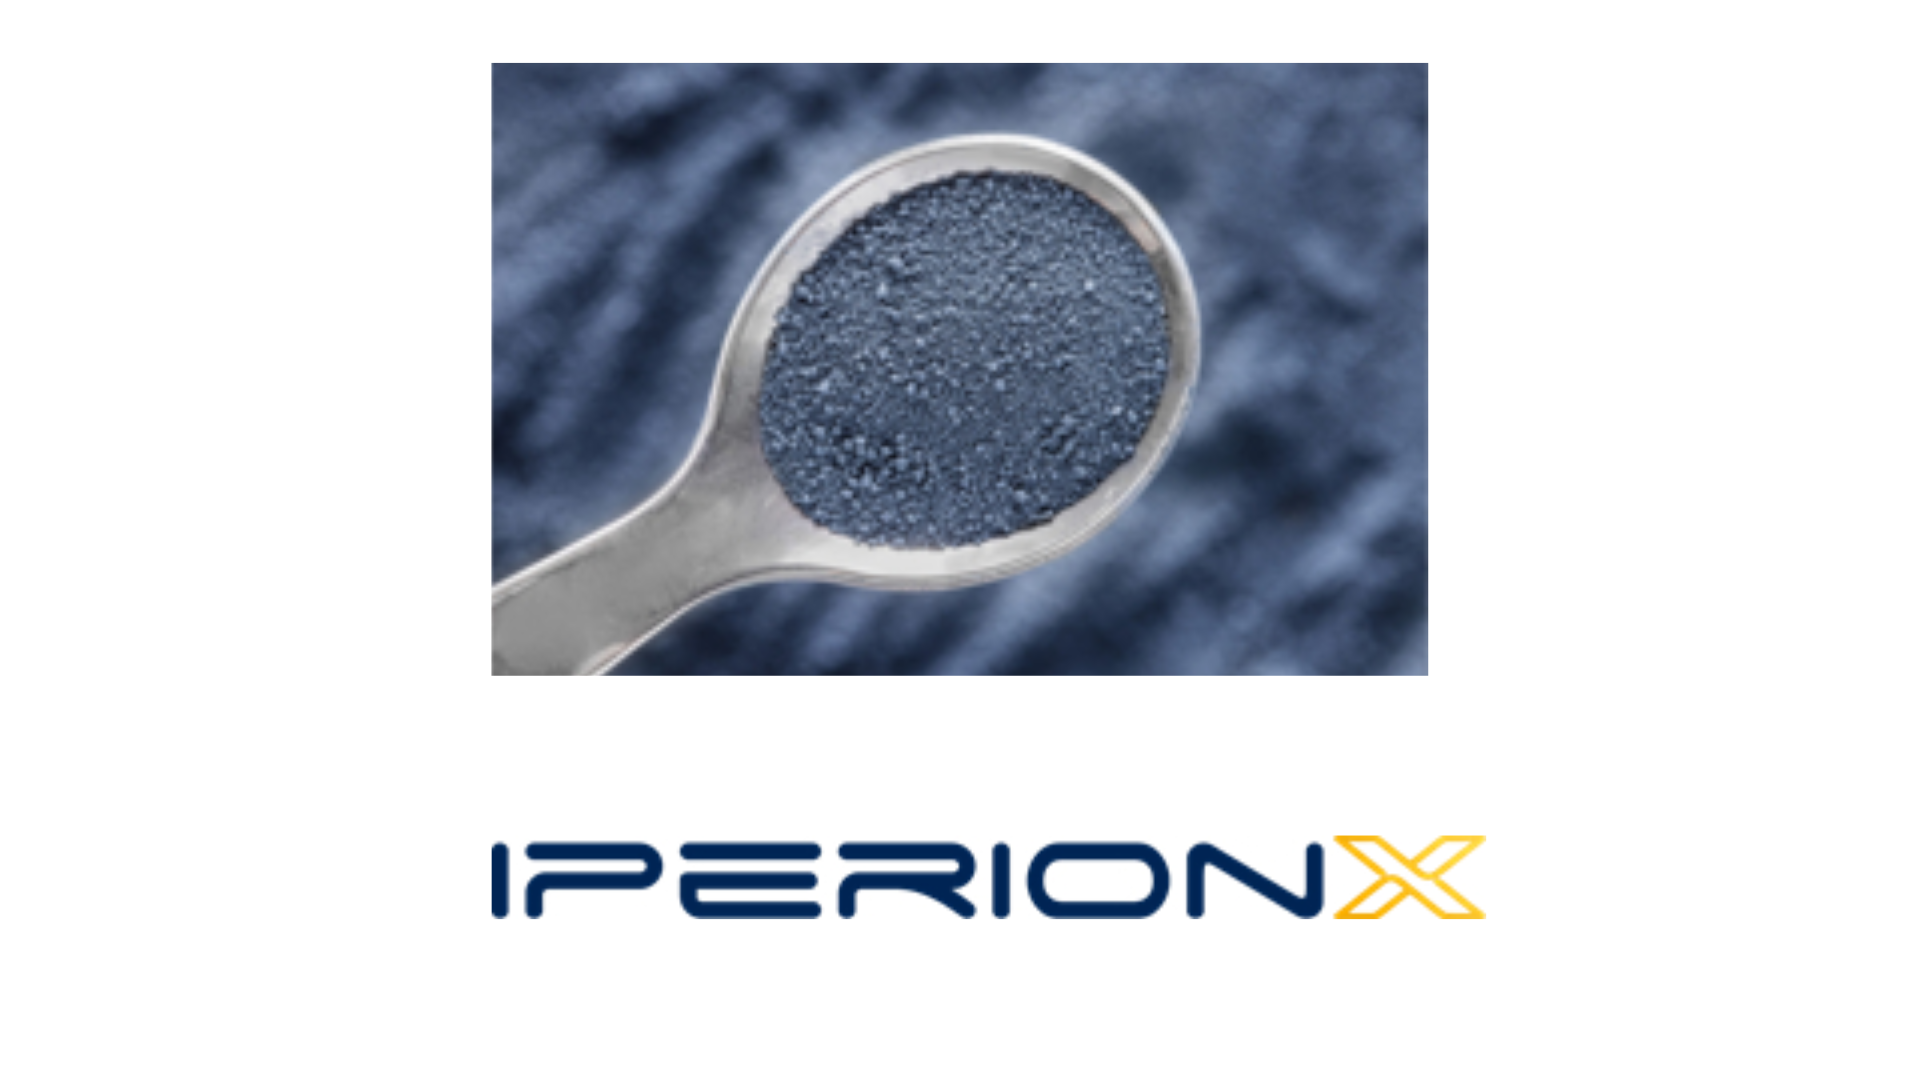 IperionX won the U.S. Department of Defense’s NSIN AFRL Grand Challenge contract focused on titanium. recycling.